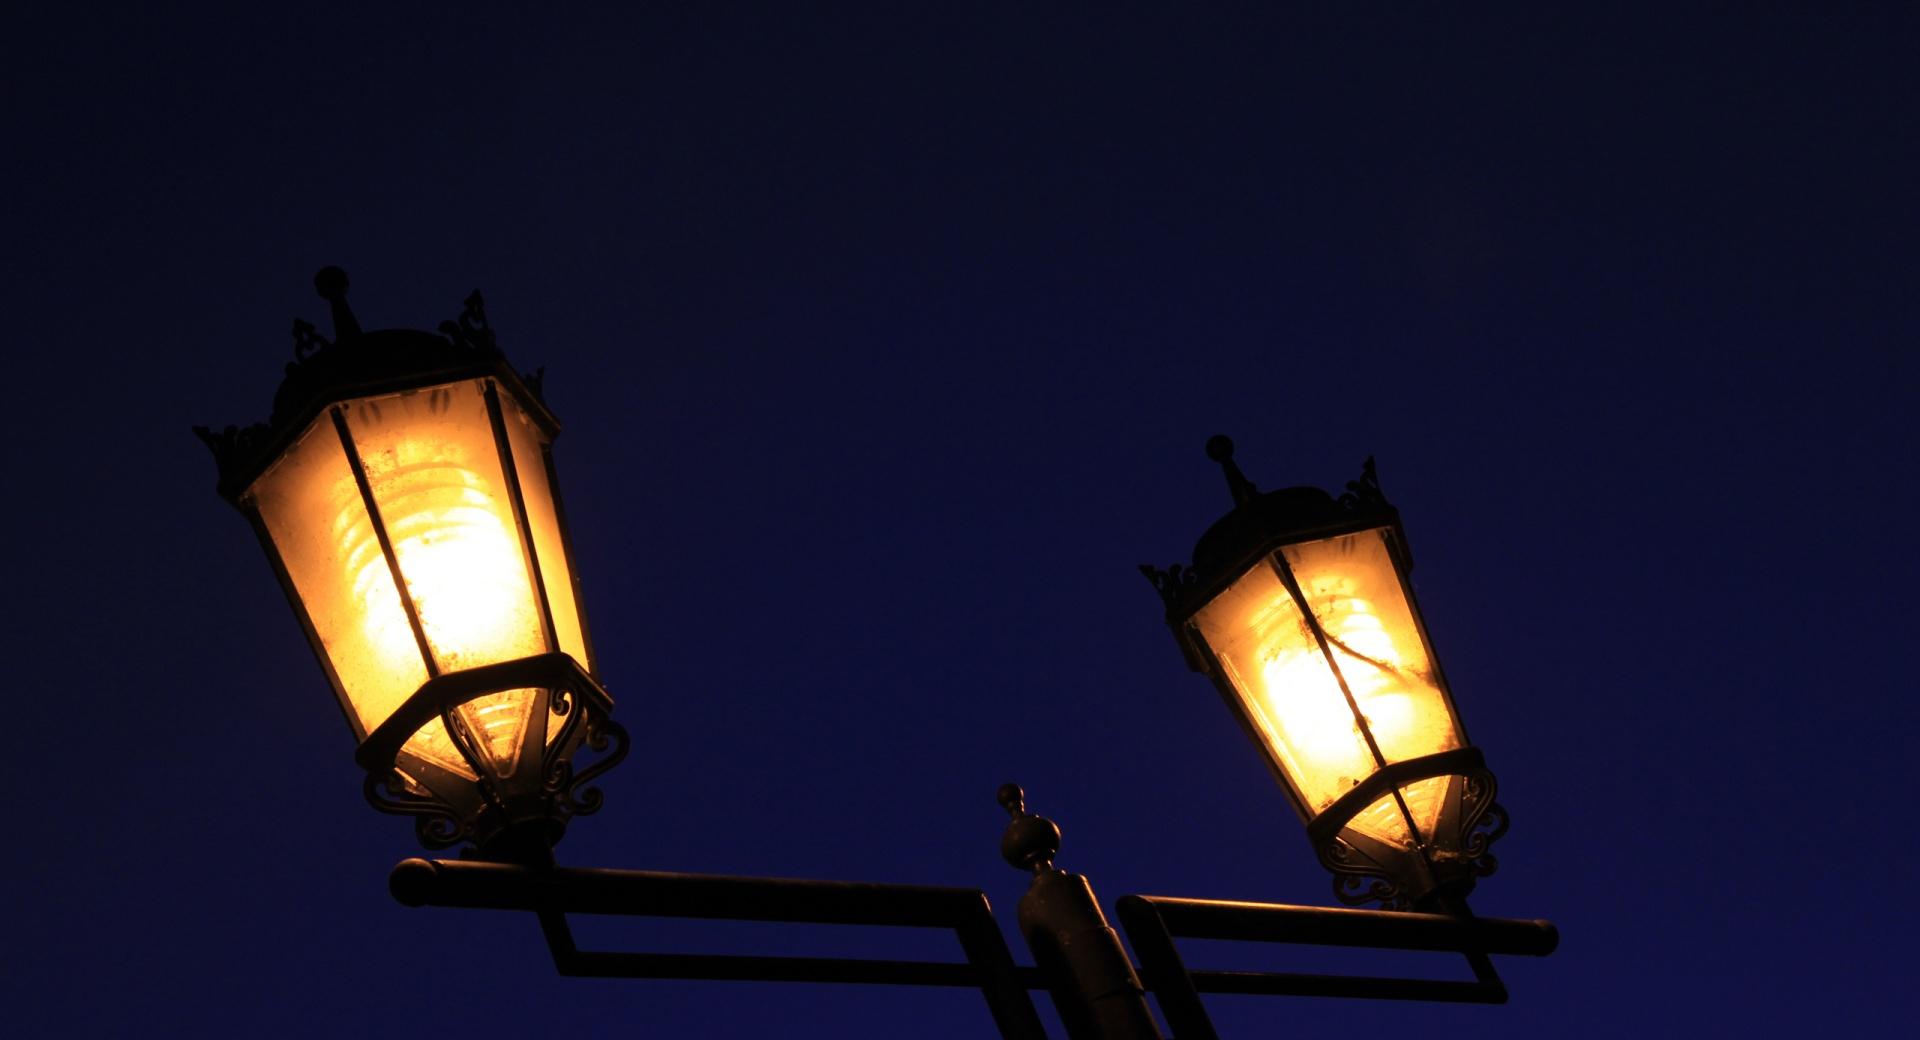 Street Lamp At Night wallpapers HD quality